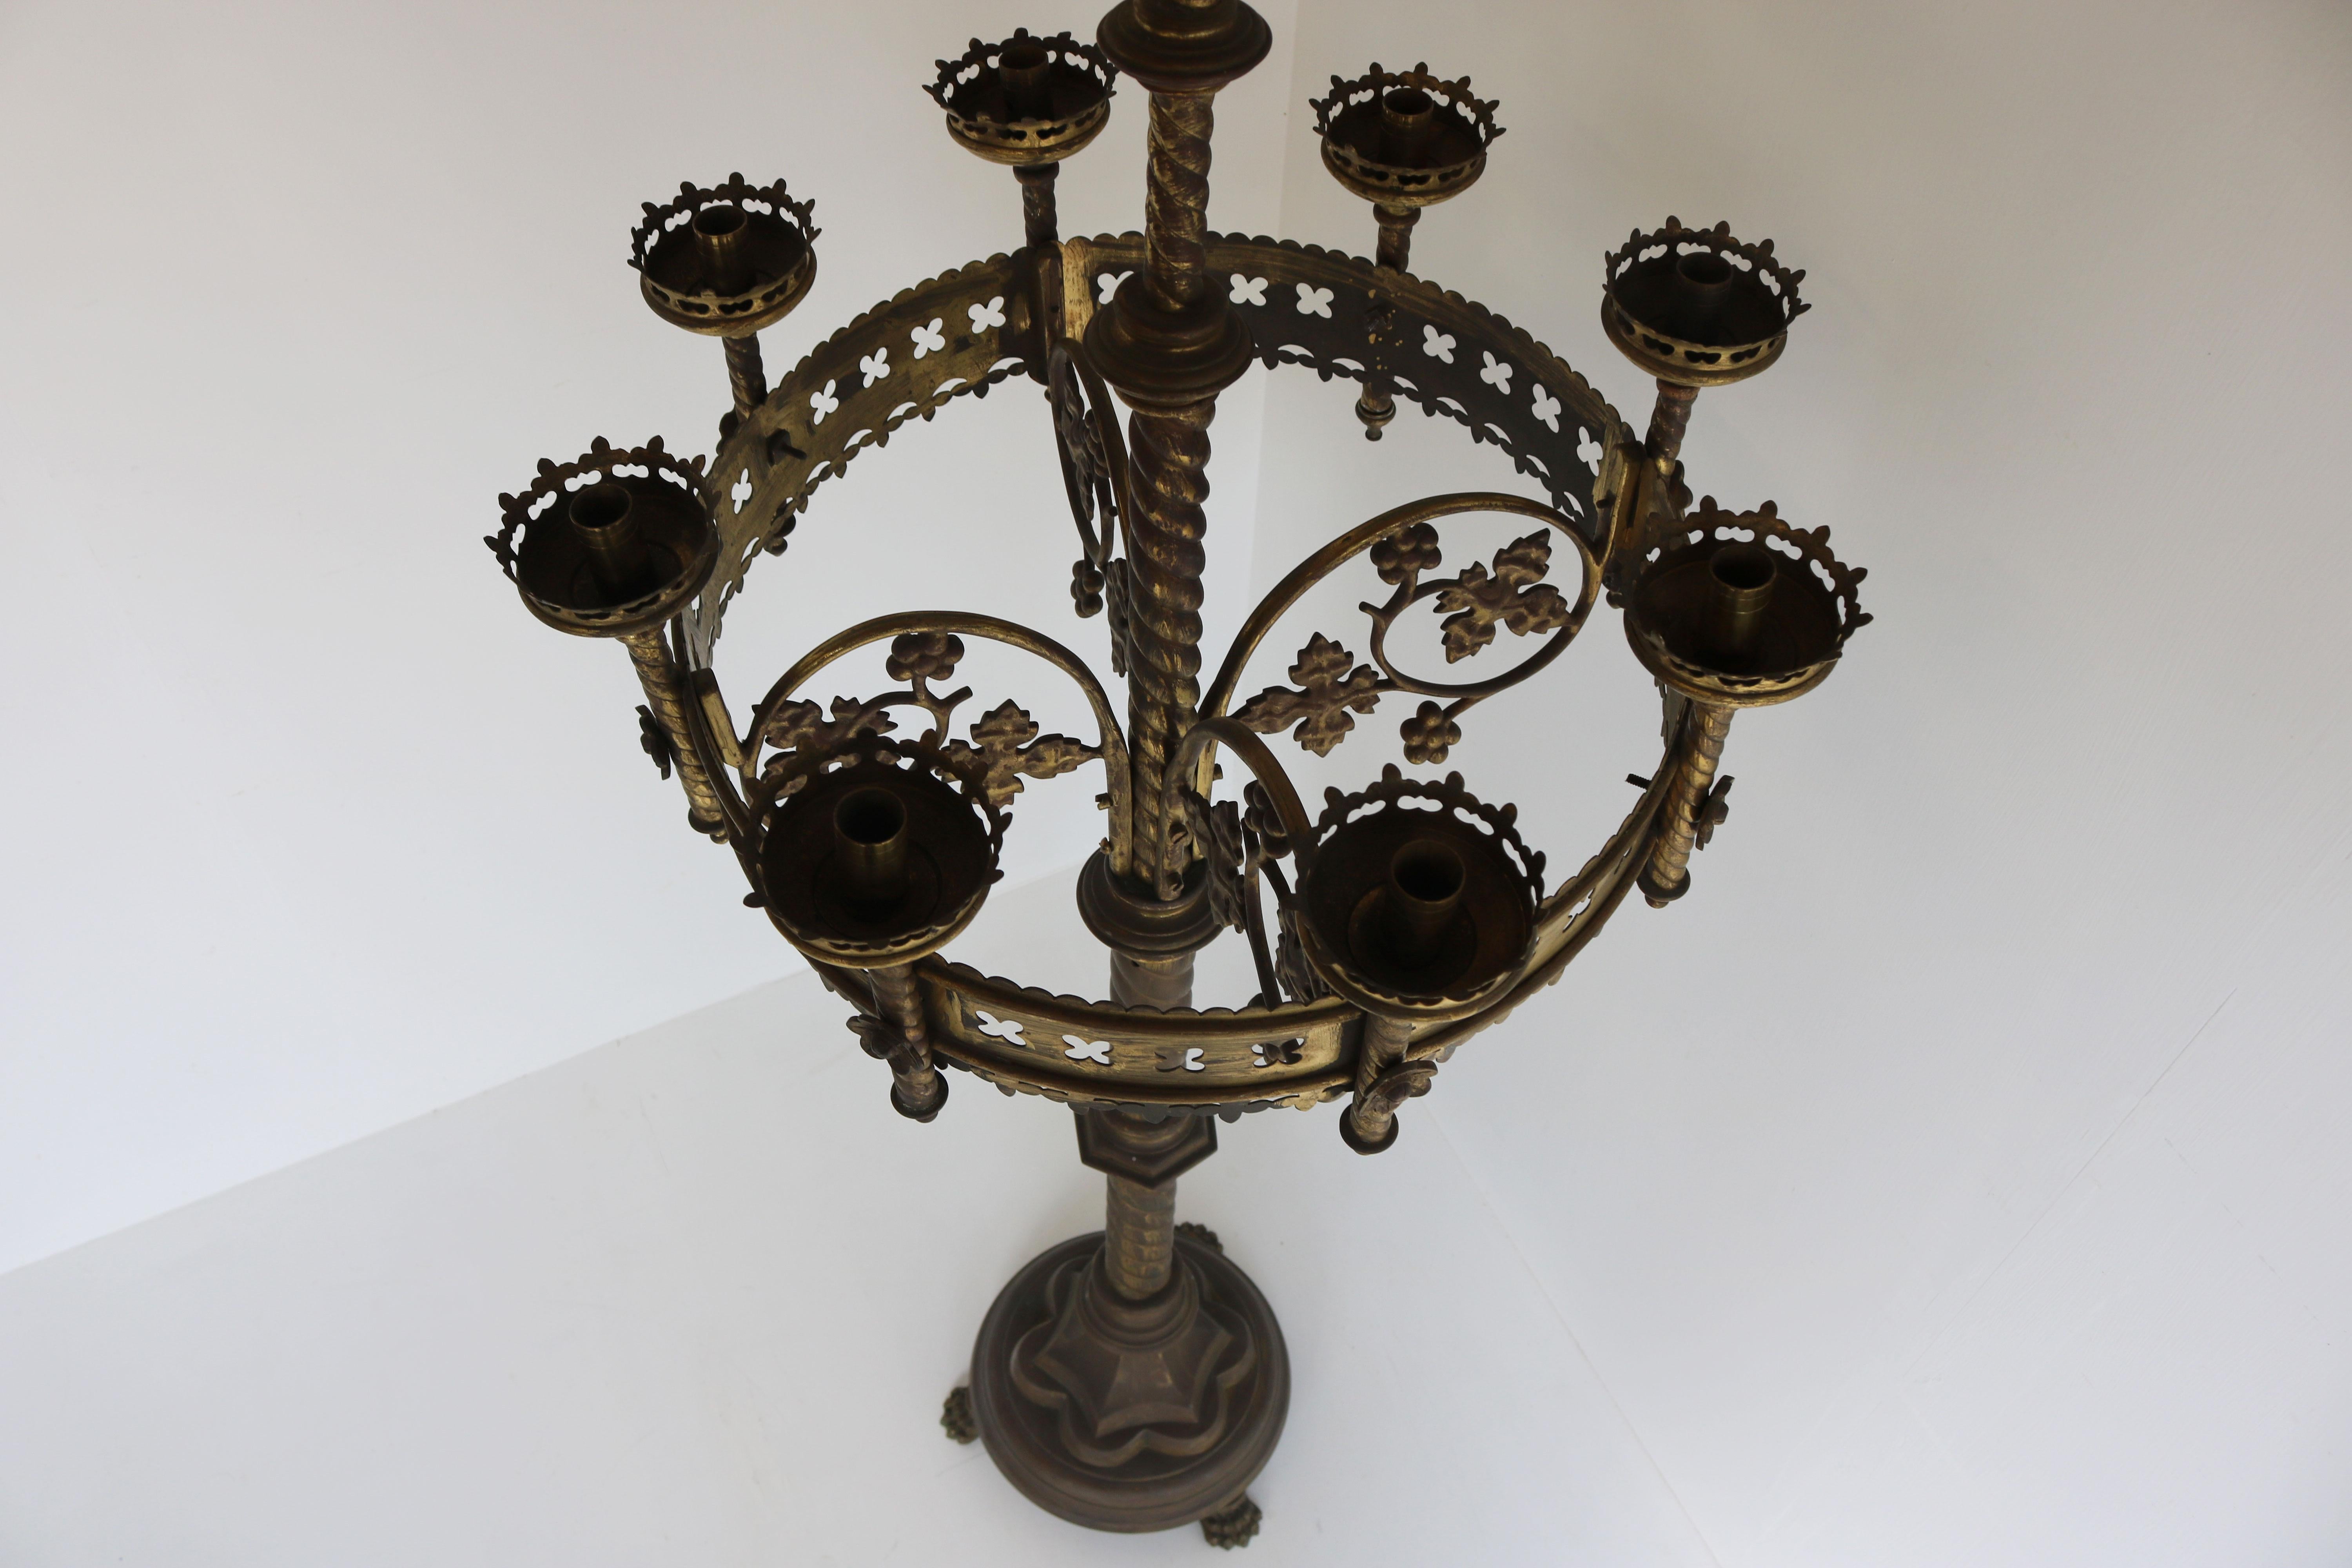 Large Antique Gothic Revival Church Candelabras 19th Century Brass Candlestick For Sale 3